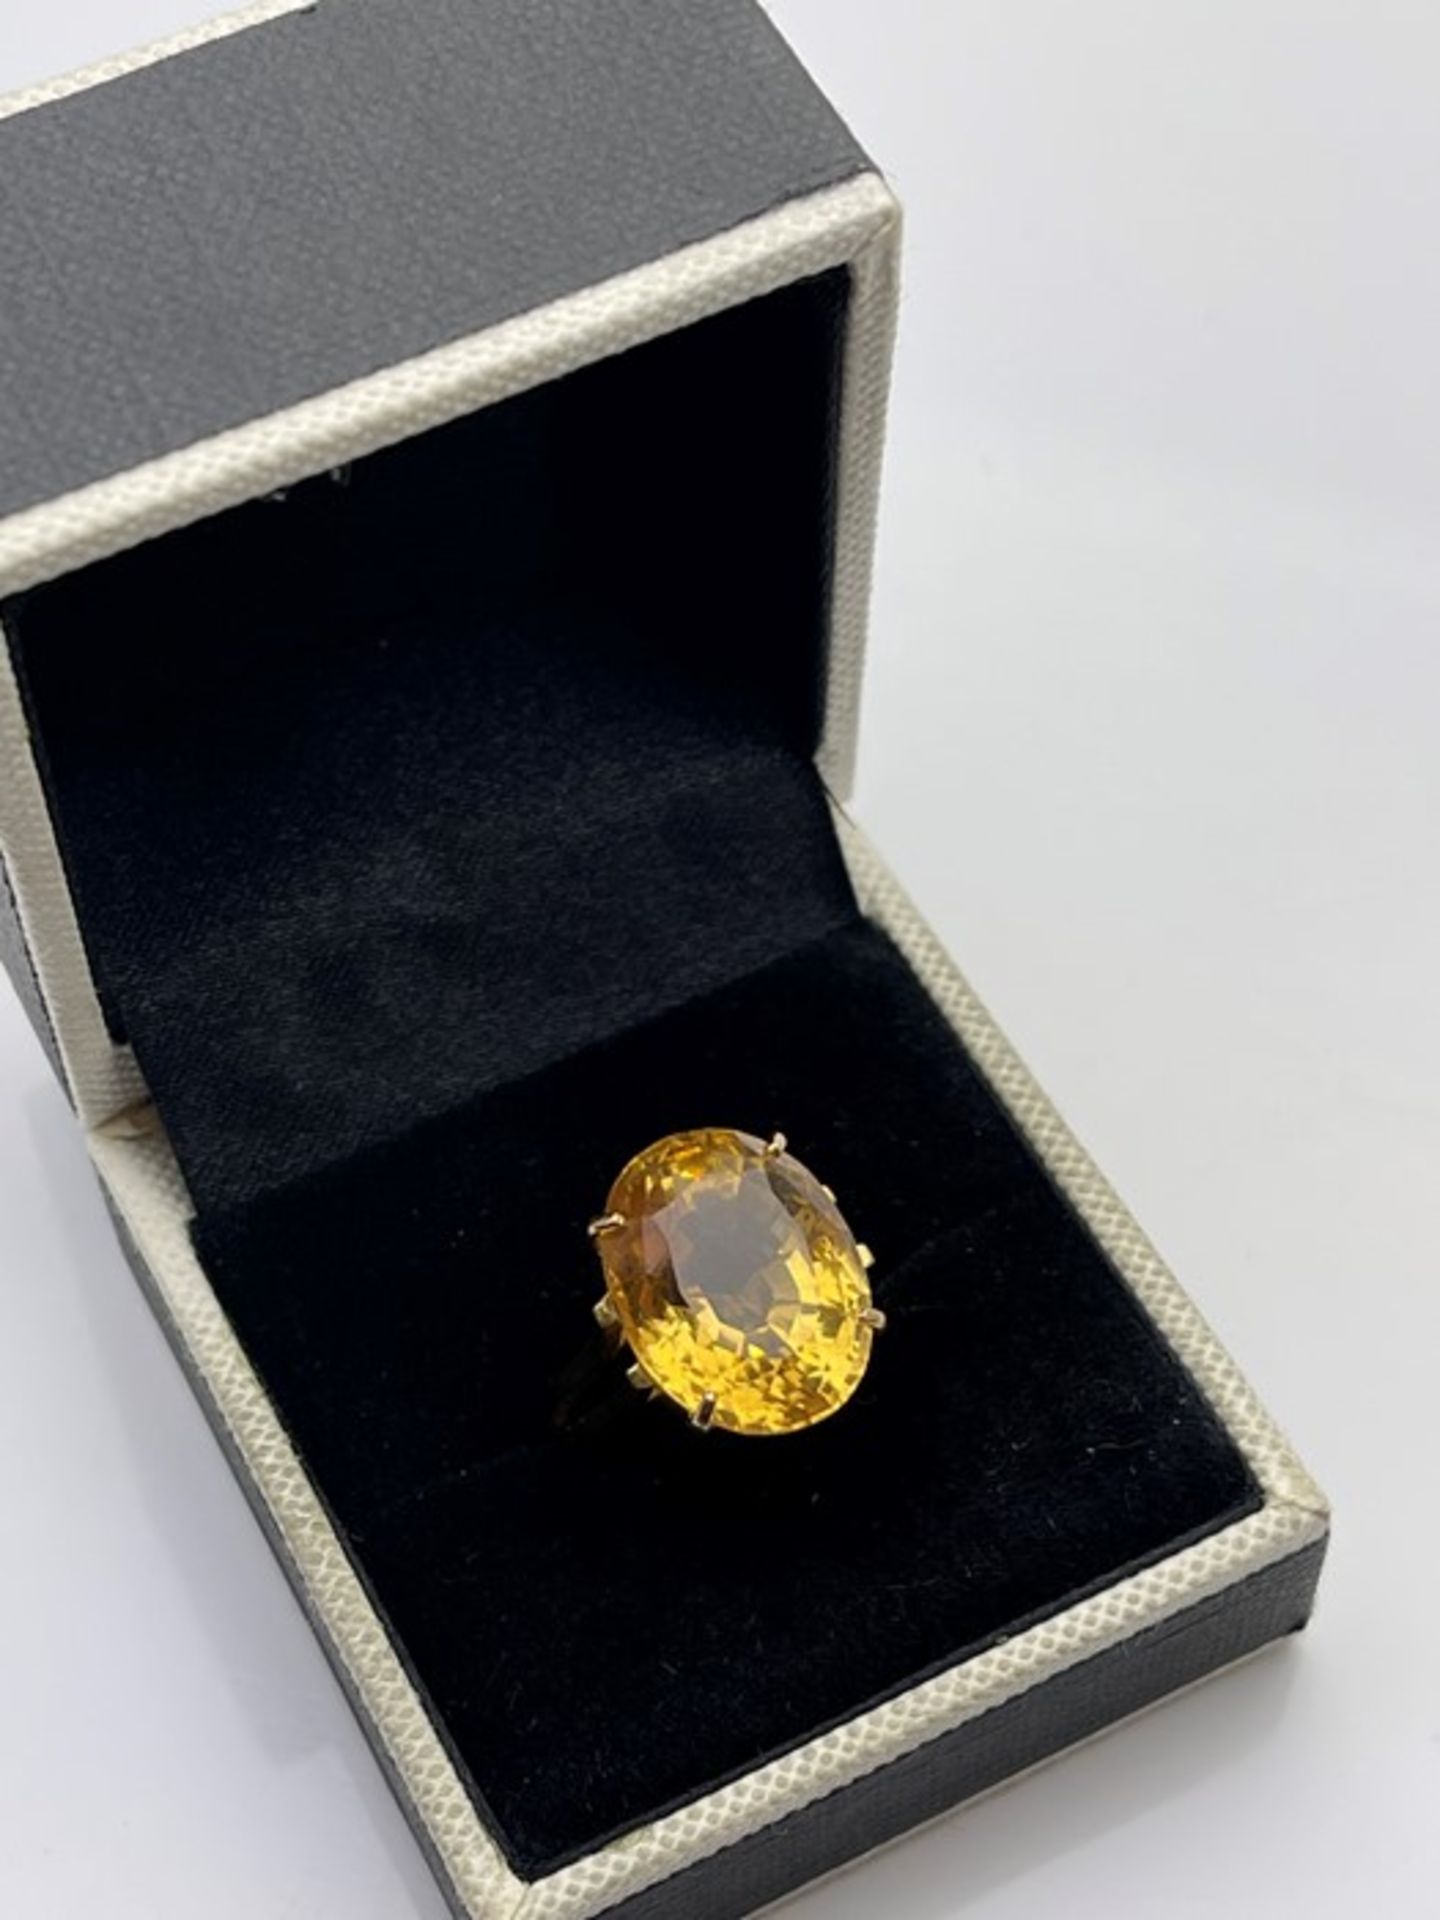 ***£5920.00*** YELLOW GOLD LADIES LARGE CITRINE RING, SET WITH ONE OVAL CITRINE, TOTAL CITRINE